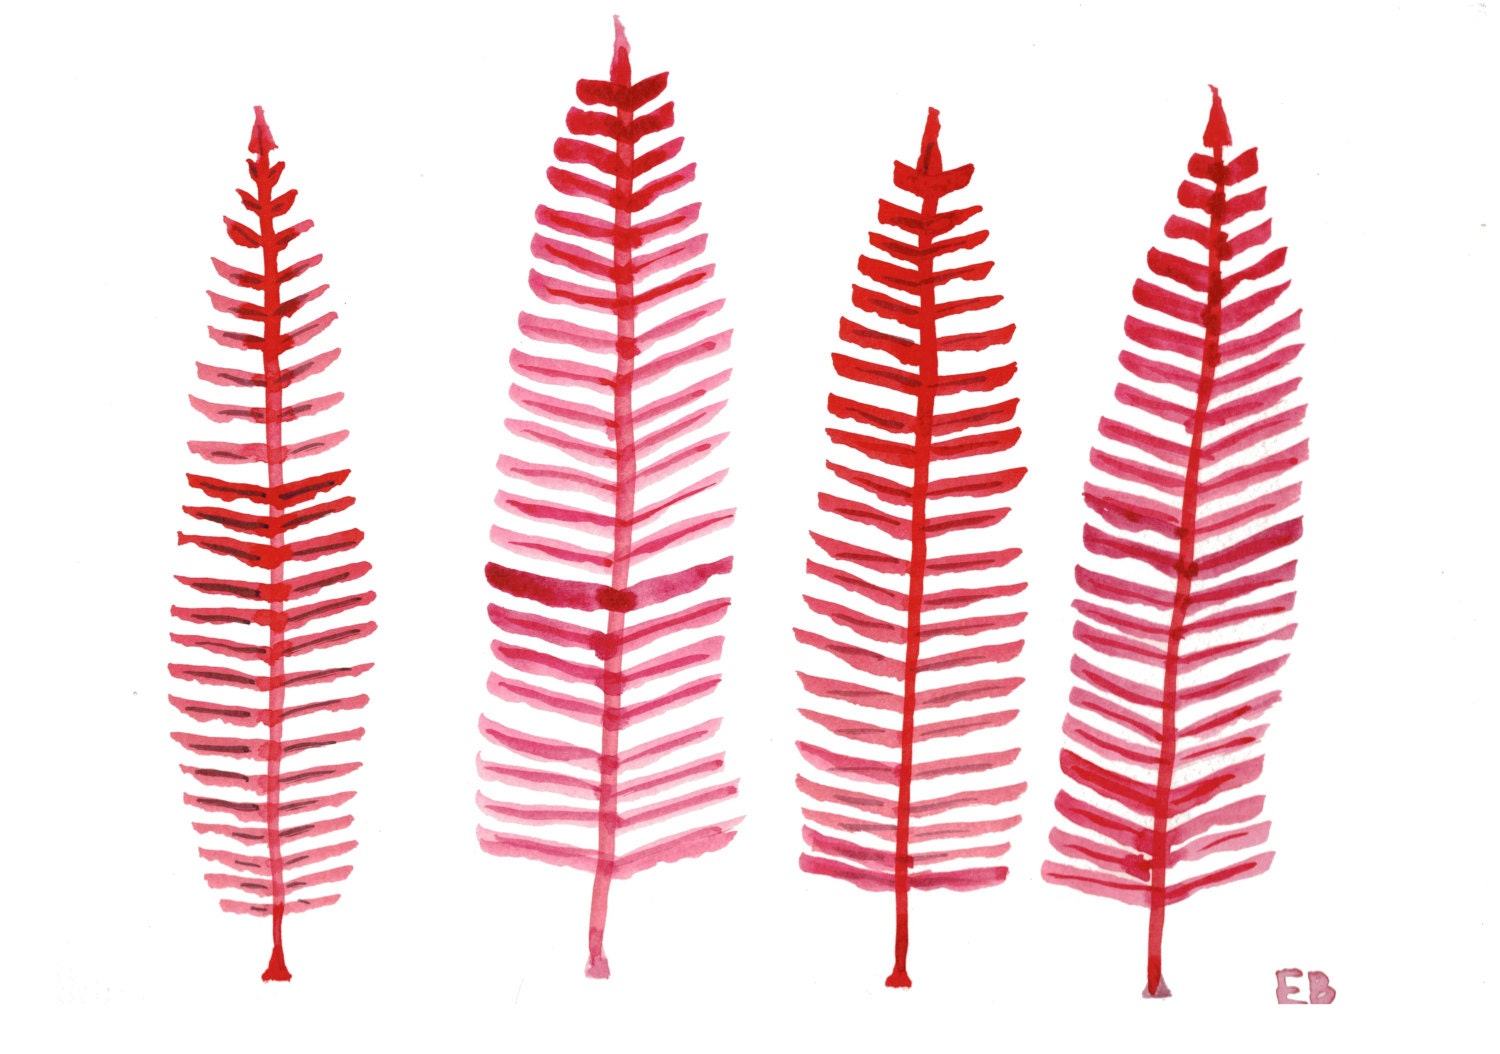 Original Red Ferns Painting, Red Watercolor Ferns with hues of pink, Fall leaves Ink Drawing - WishlistArt